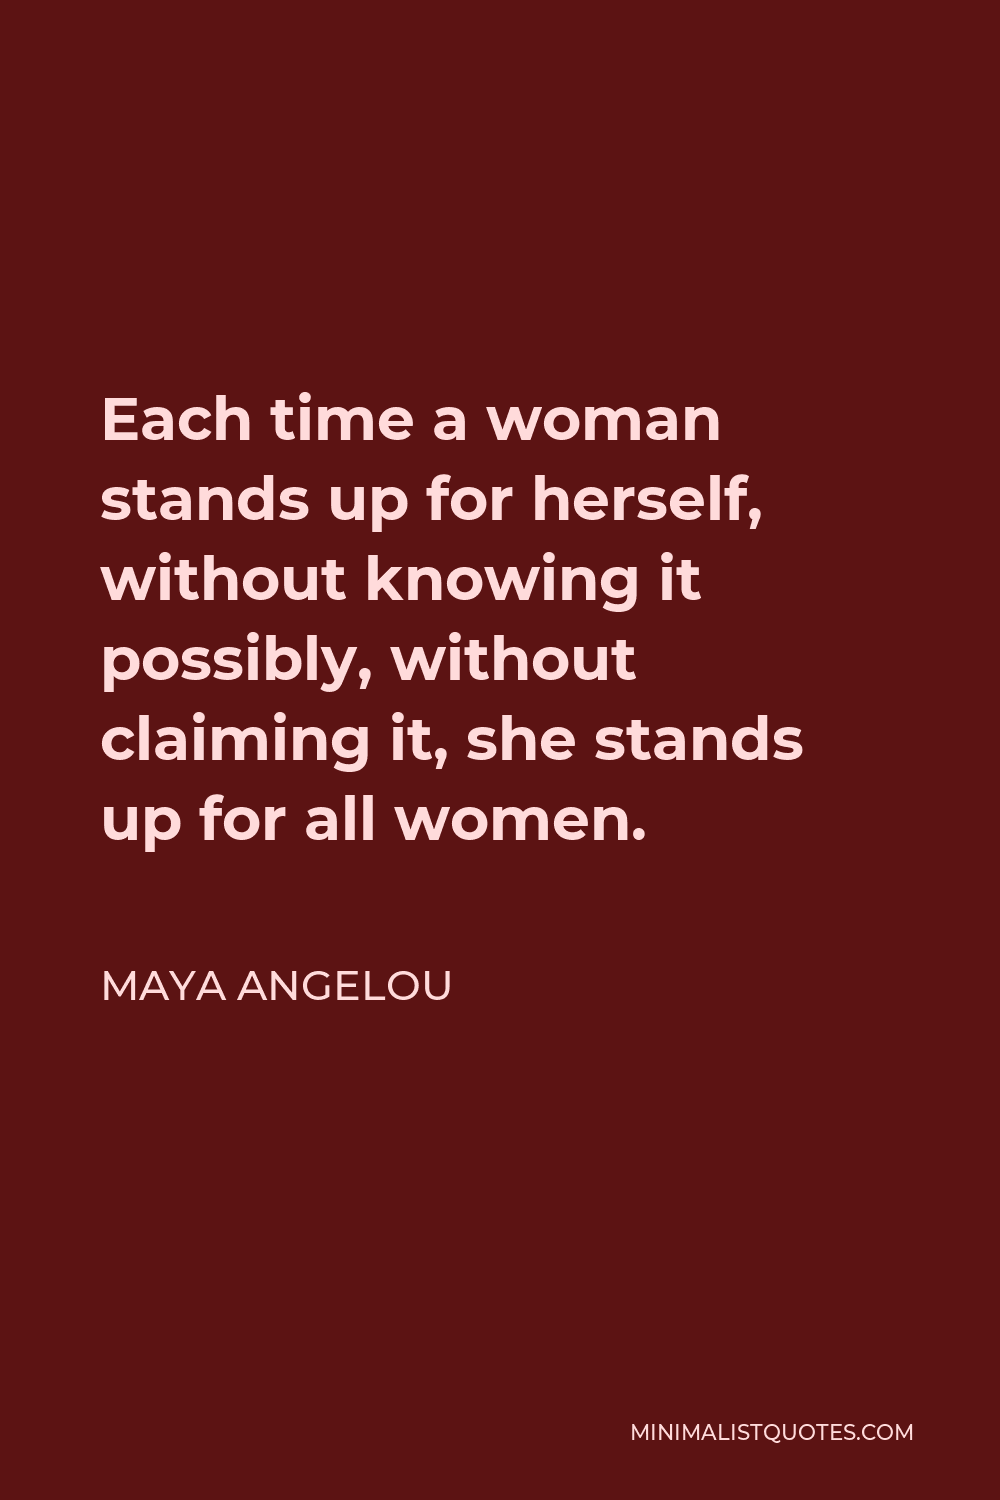 Maya Angelou Quote: Each time a woman stands up for herself, without ...